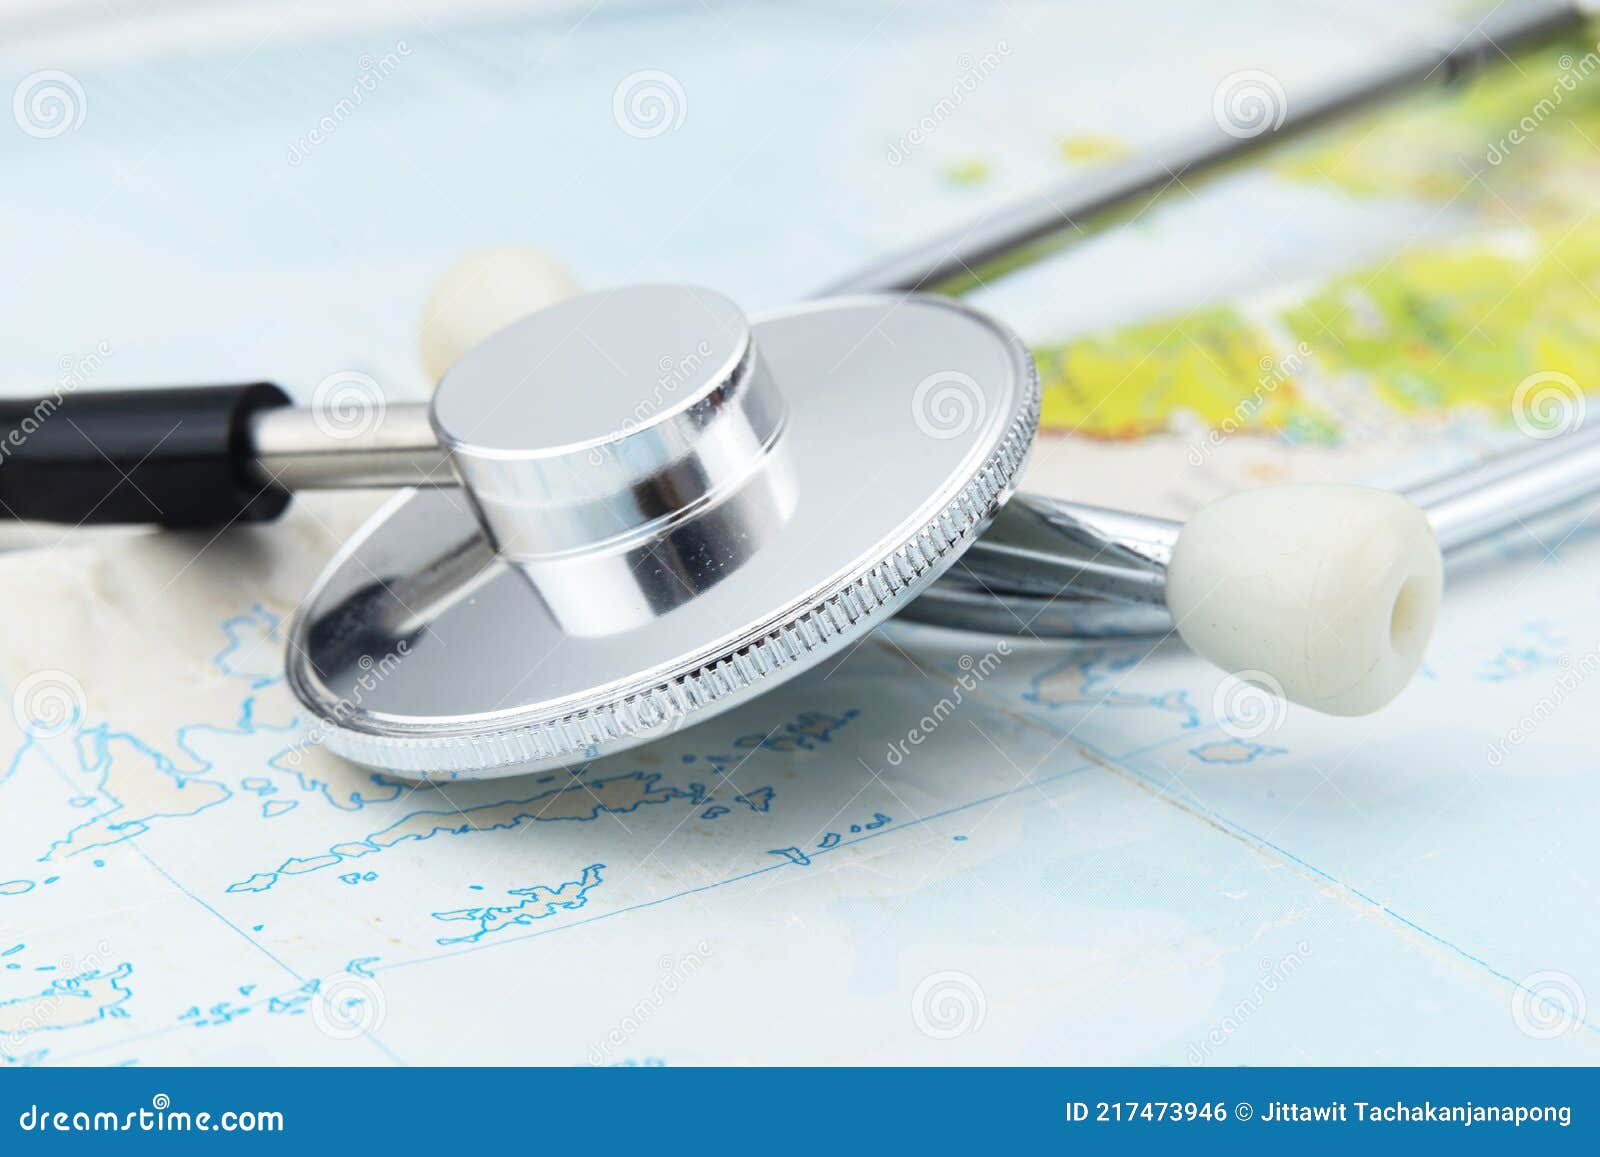 stethoscope on map medical concept turism travel care diseasea healthy